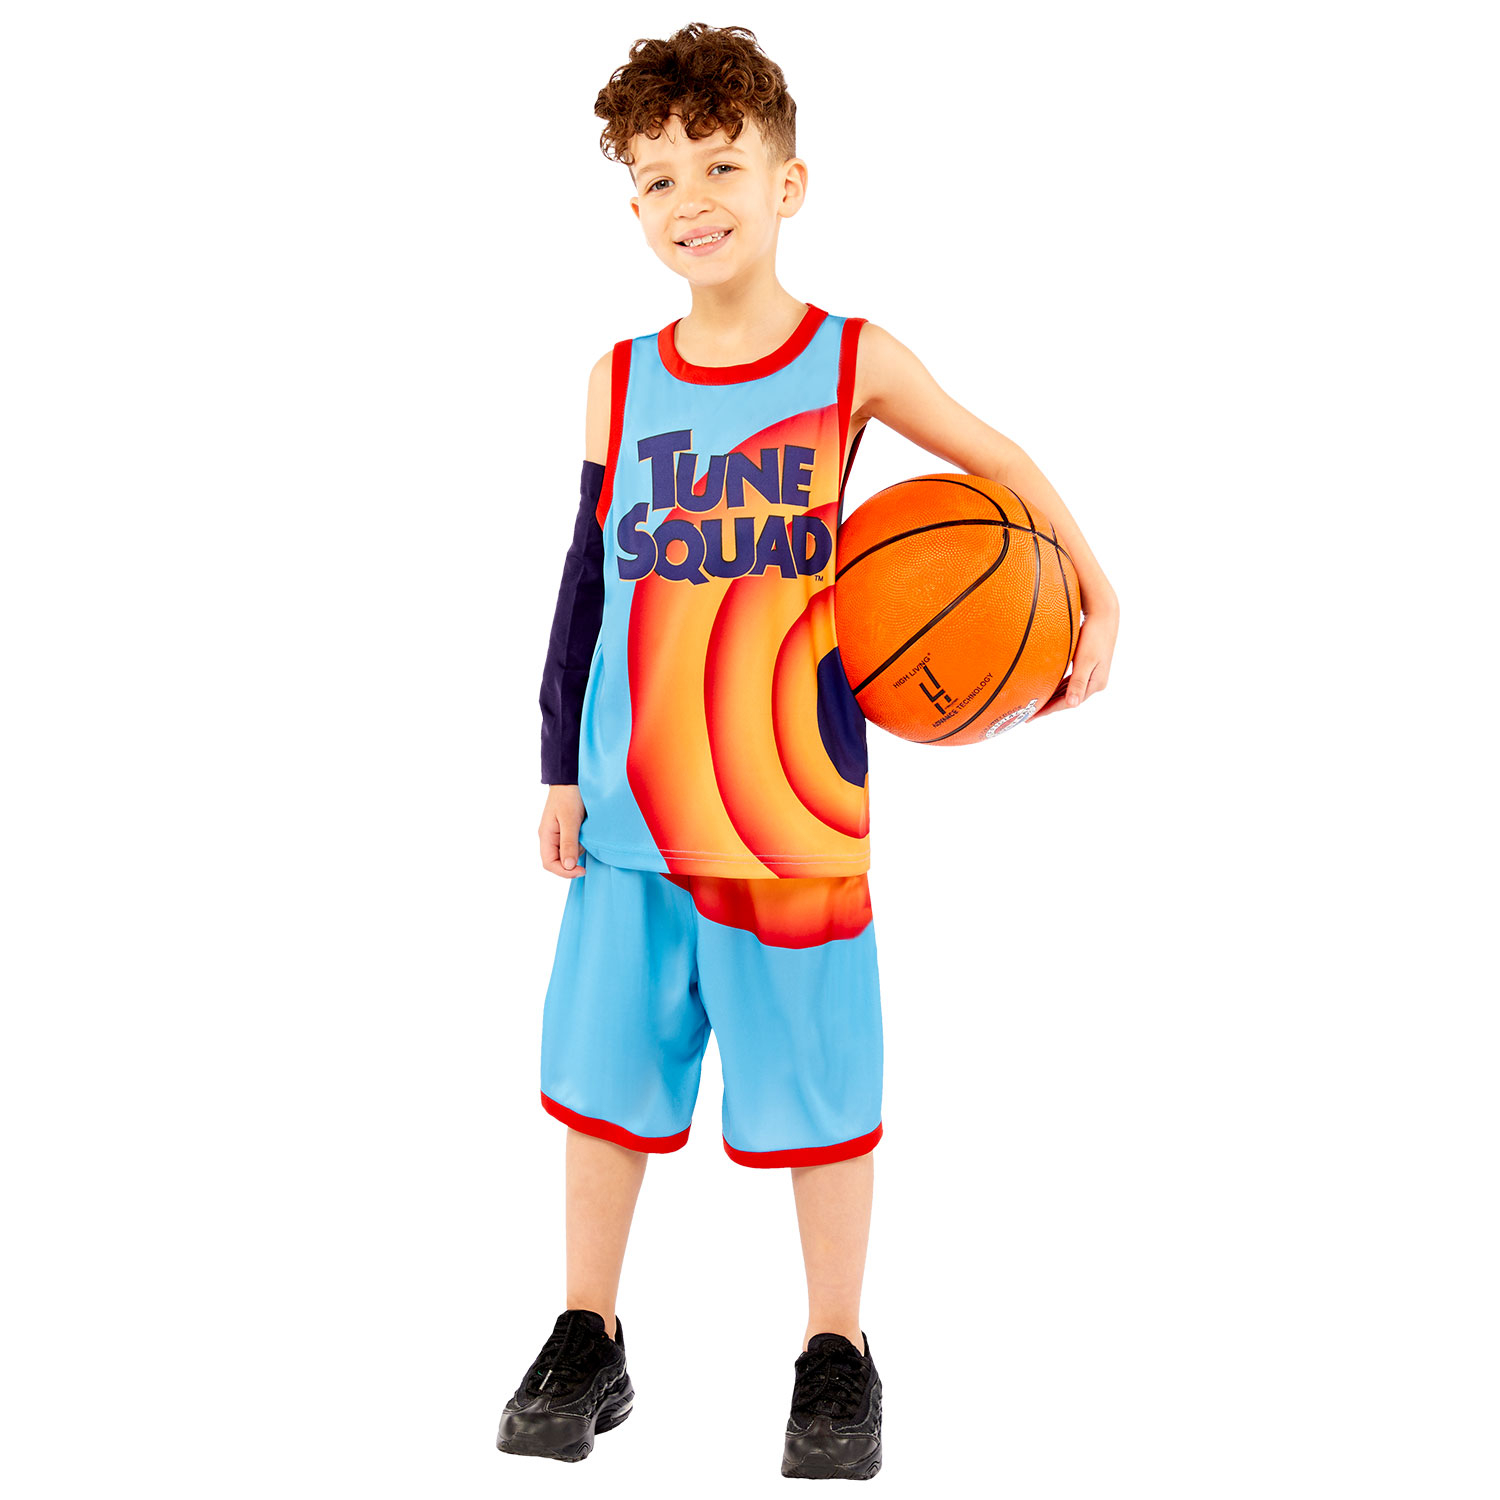 Space Movie Basketball Jersey #6-#1-#10-# 2-# 1/3-# 8-18 Years Old Christmas Family Cosutmes Youth & Kids Sizes Kit for